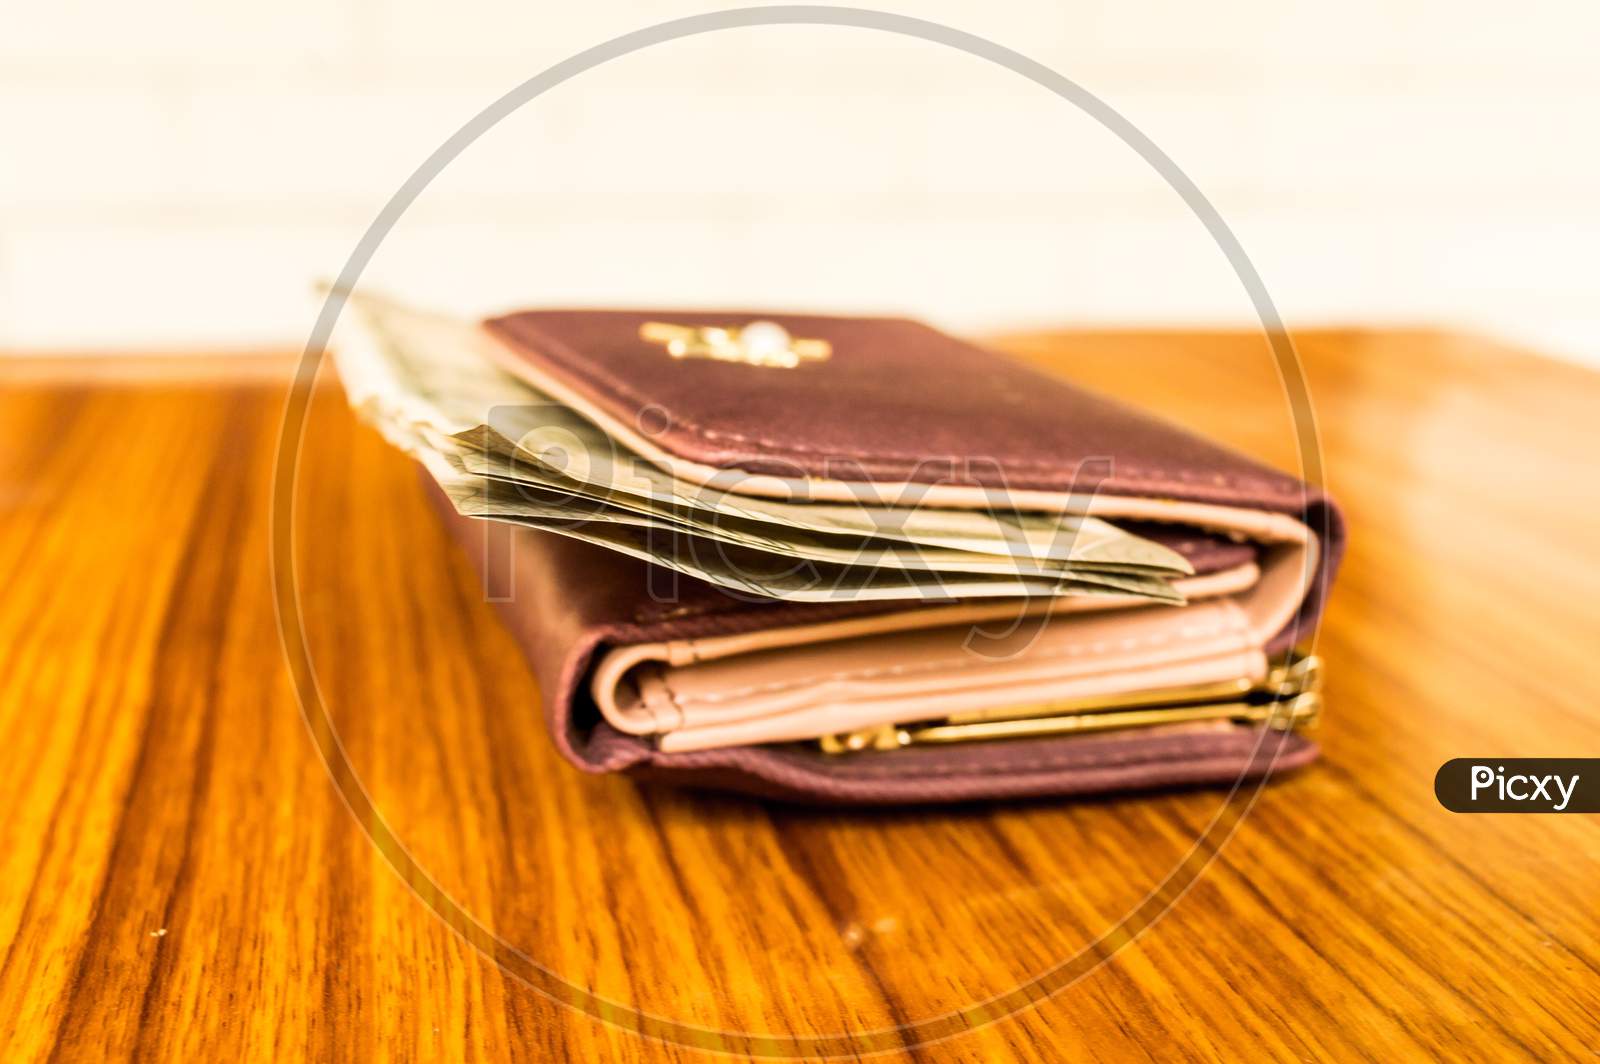 Indian Five Hundred (500) Rupee Cash Note In Brown Color Wallet Leather Purse On A Wooden Table. Business Finance Economy Concept. Side Angel View Extreme Close Up With Copy Space Room For Text Left.